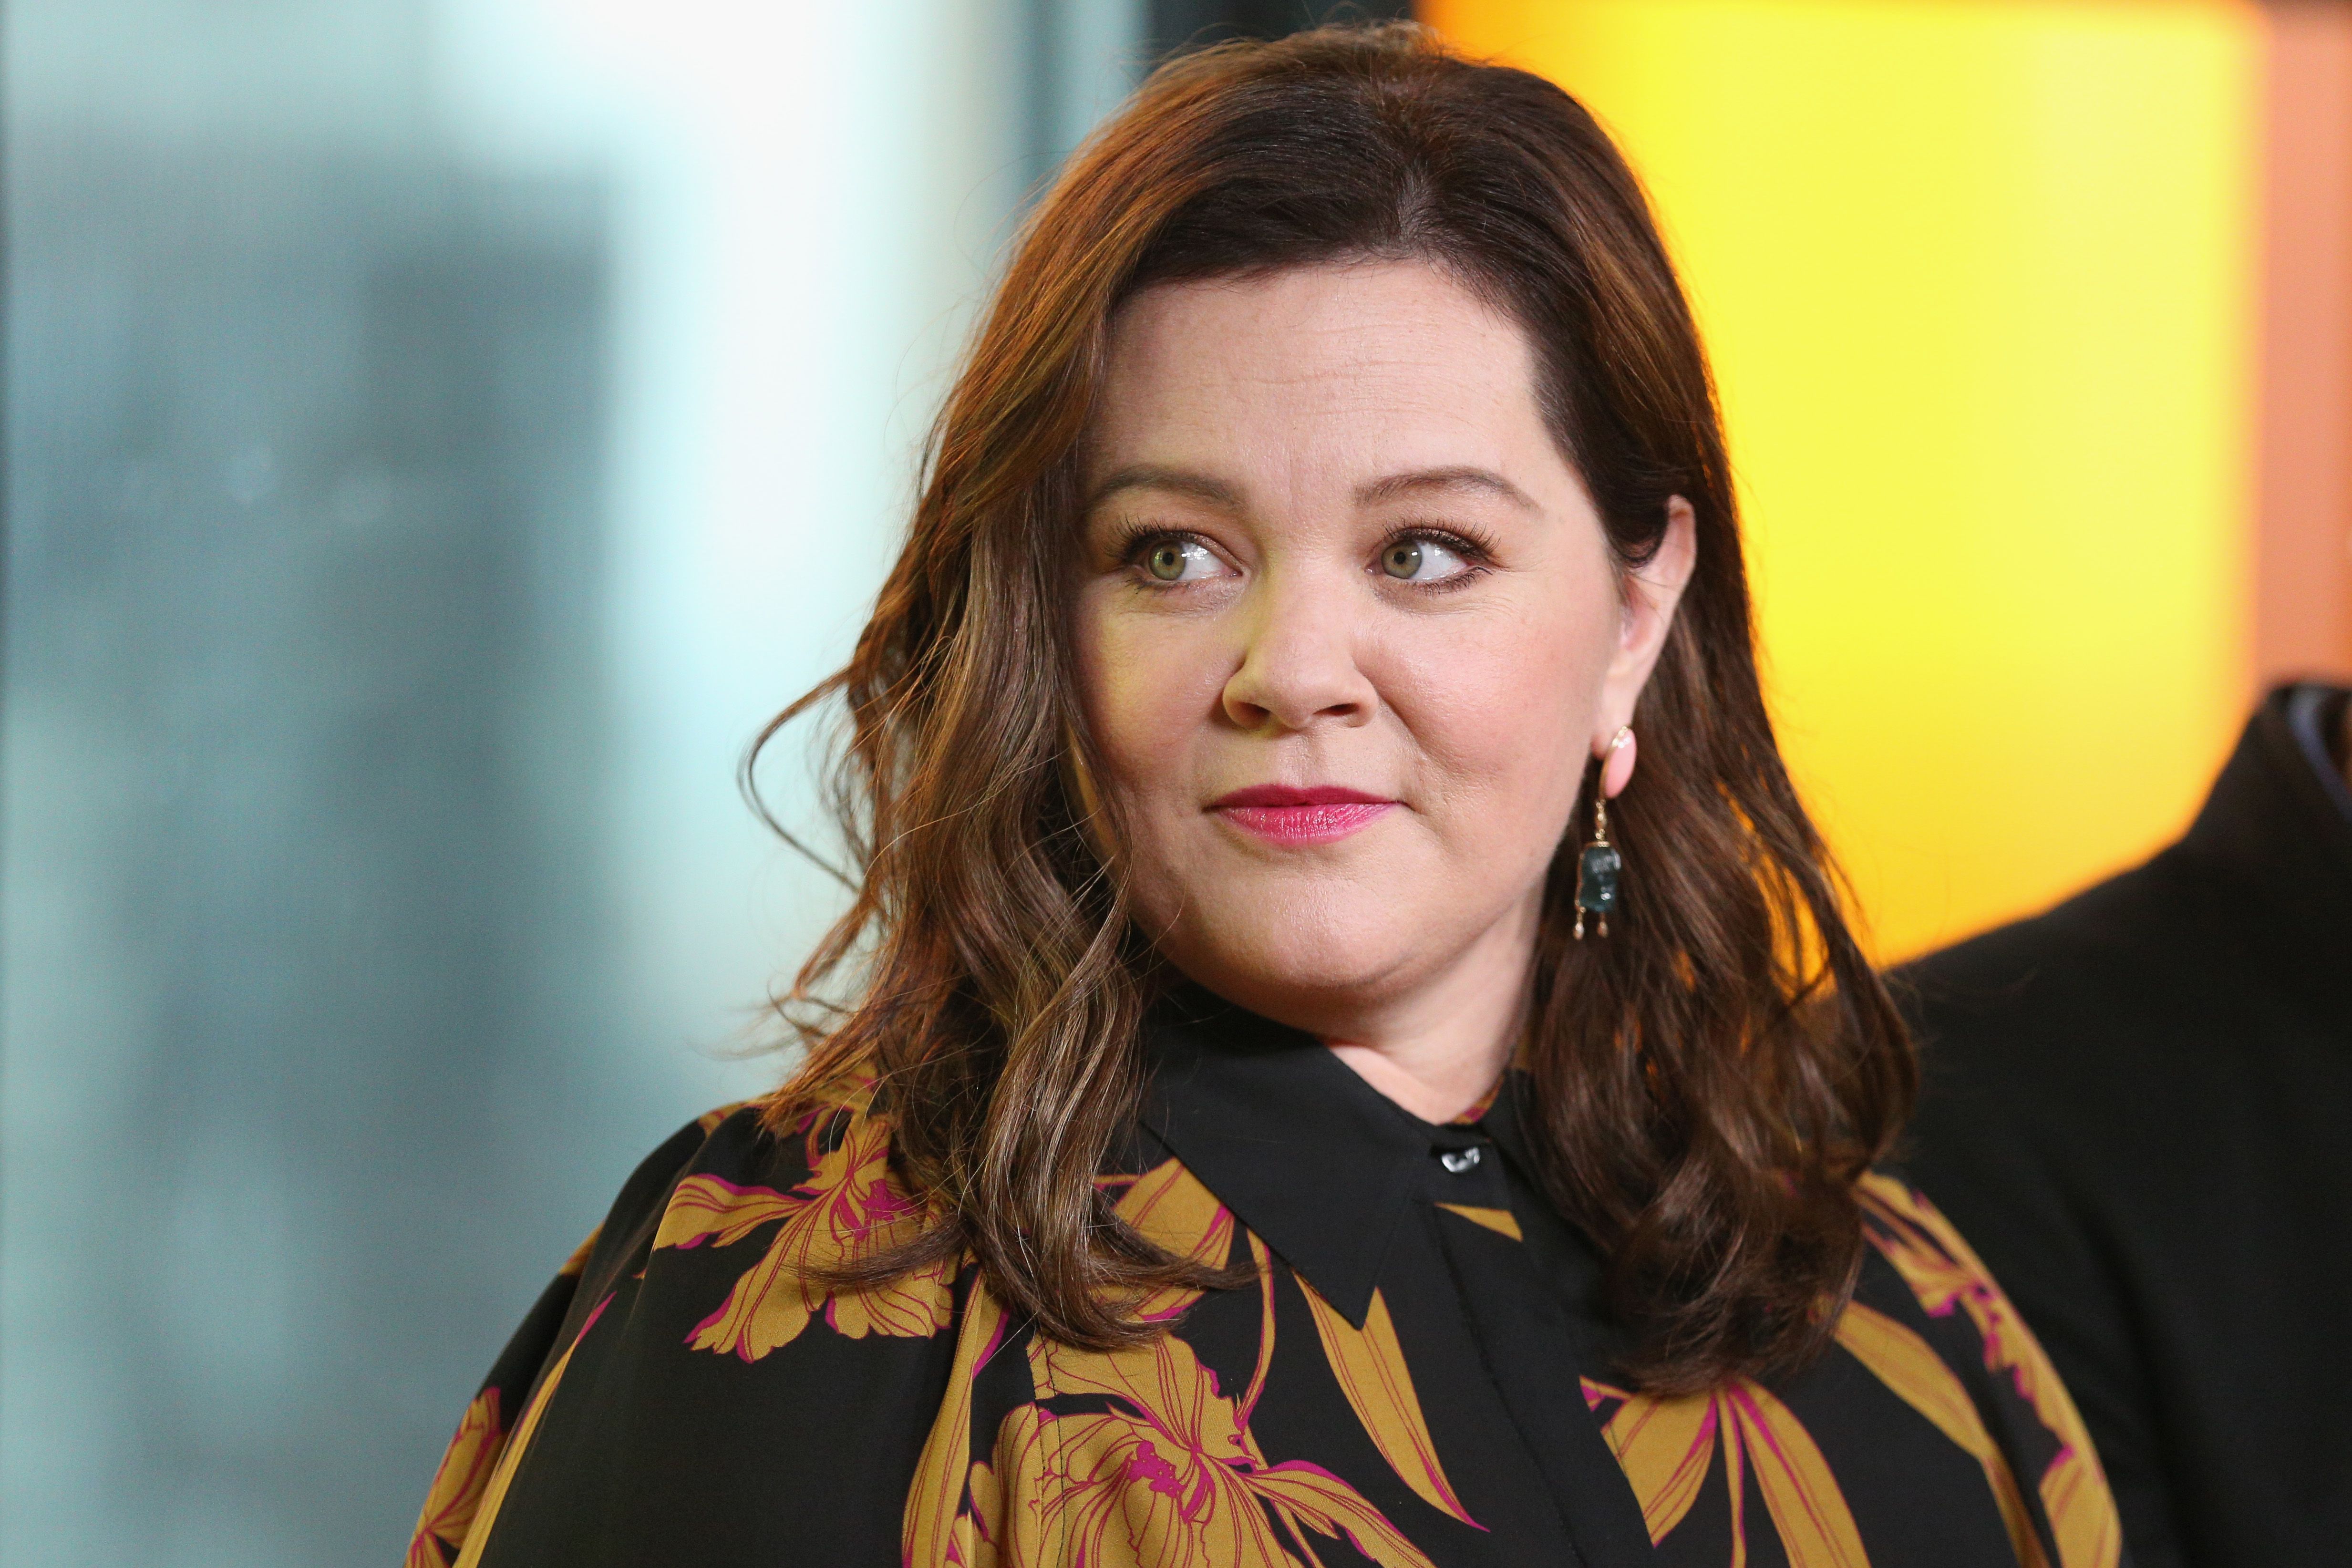 Melissa McCarthy shows off weight loss at Arts Education event in LA